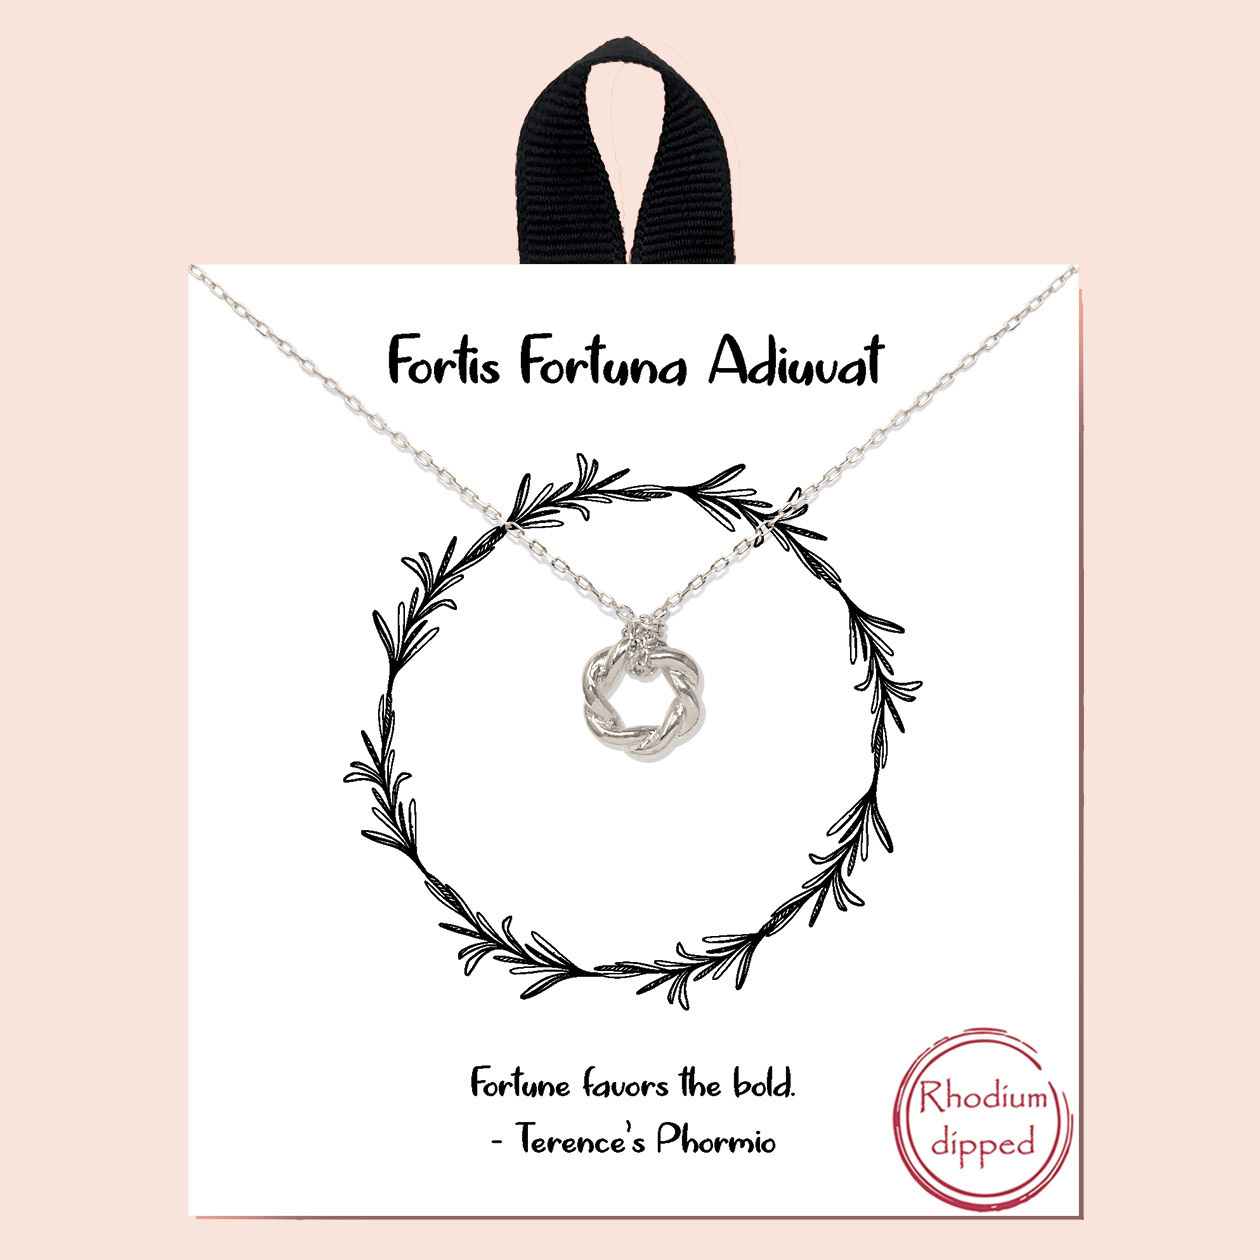 84028_Silver, &quotfortis fortuna adiuvat" twisted circle necklace/rhodium dipped